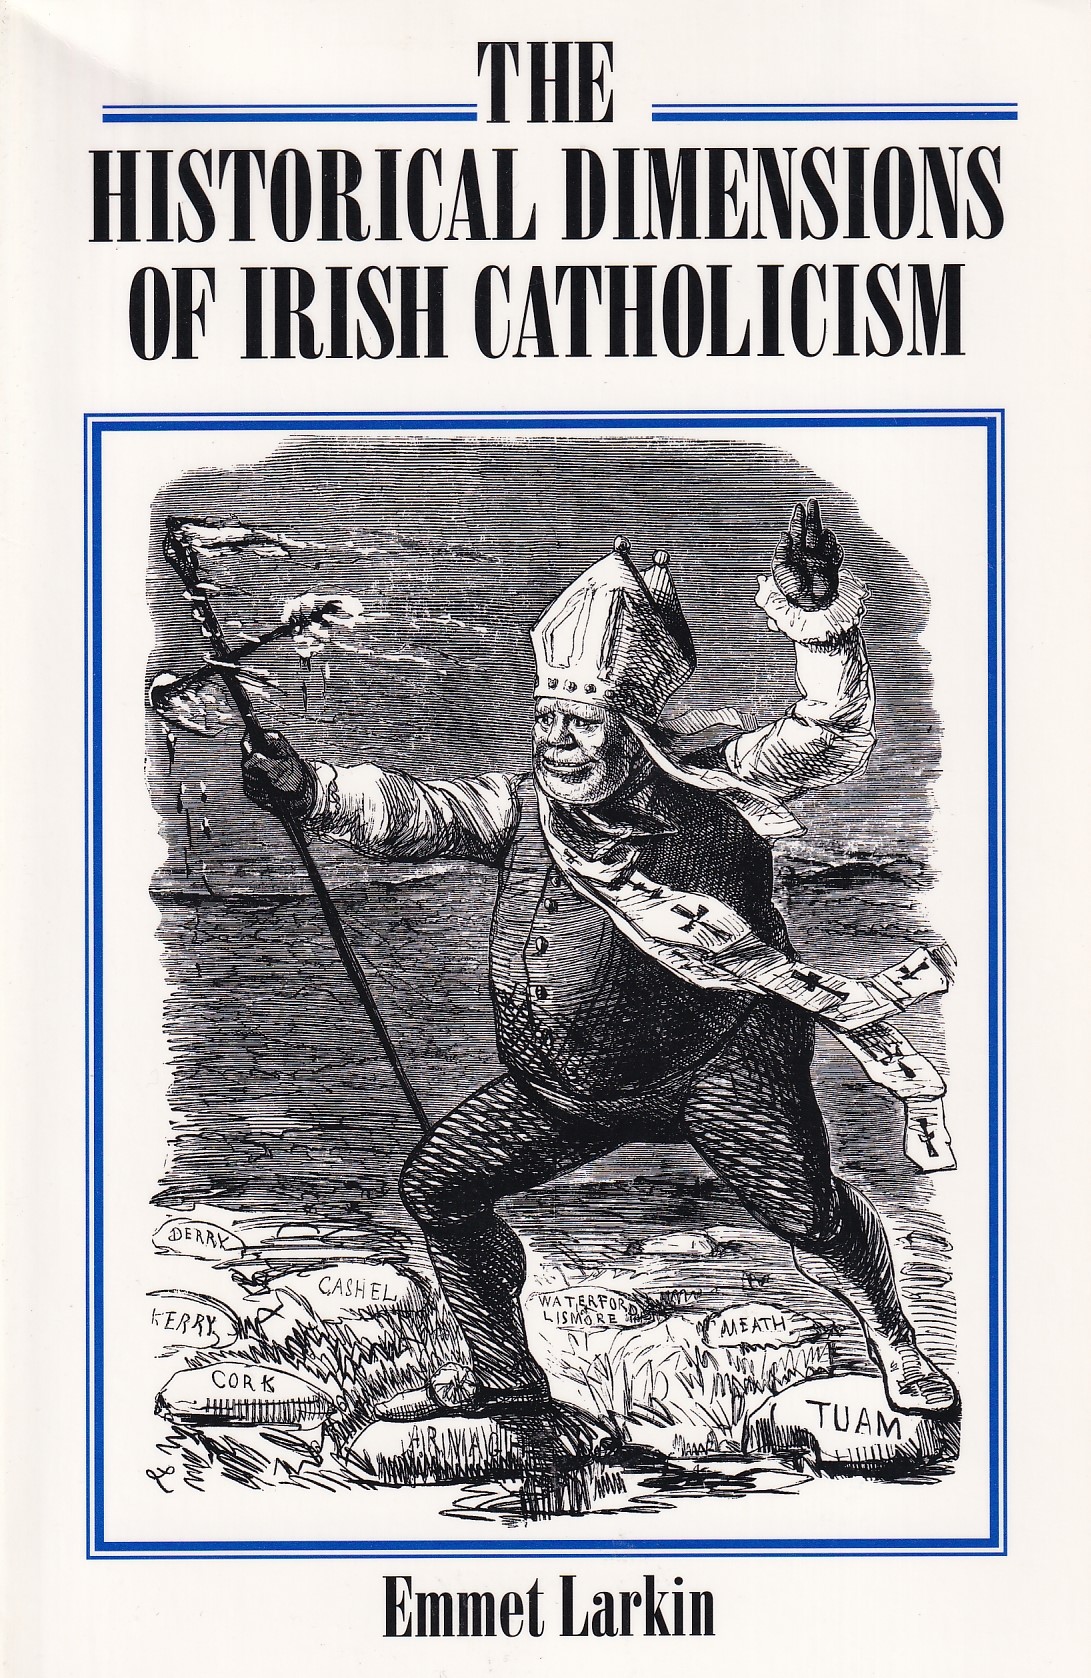 The Historical Dimensions of Irish Catholicism by Emmet Larkin